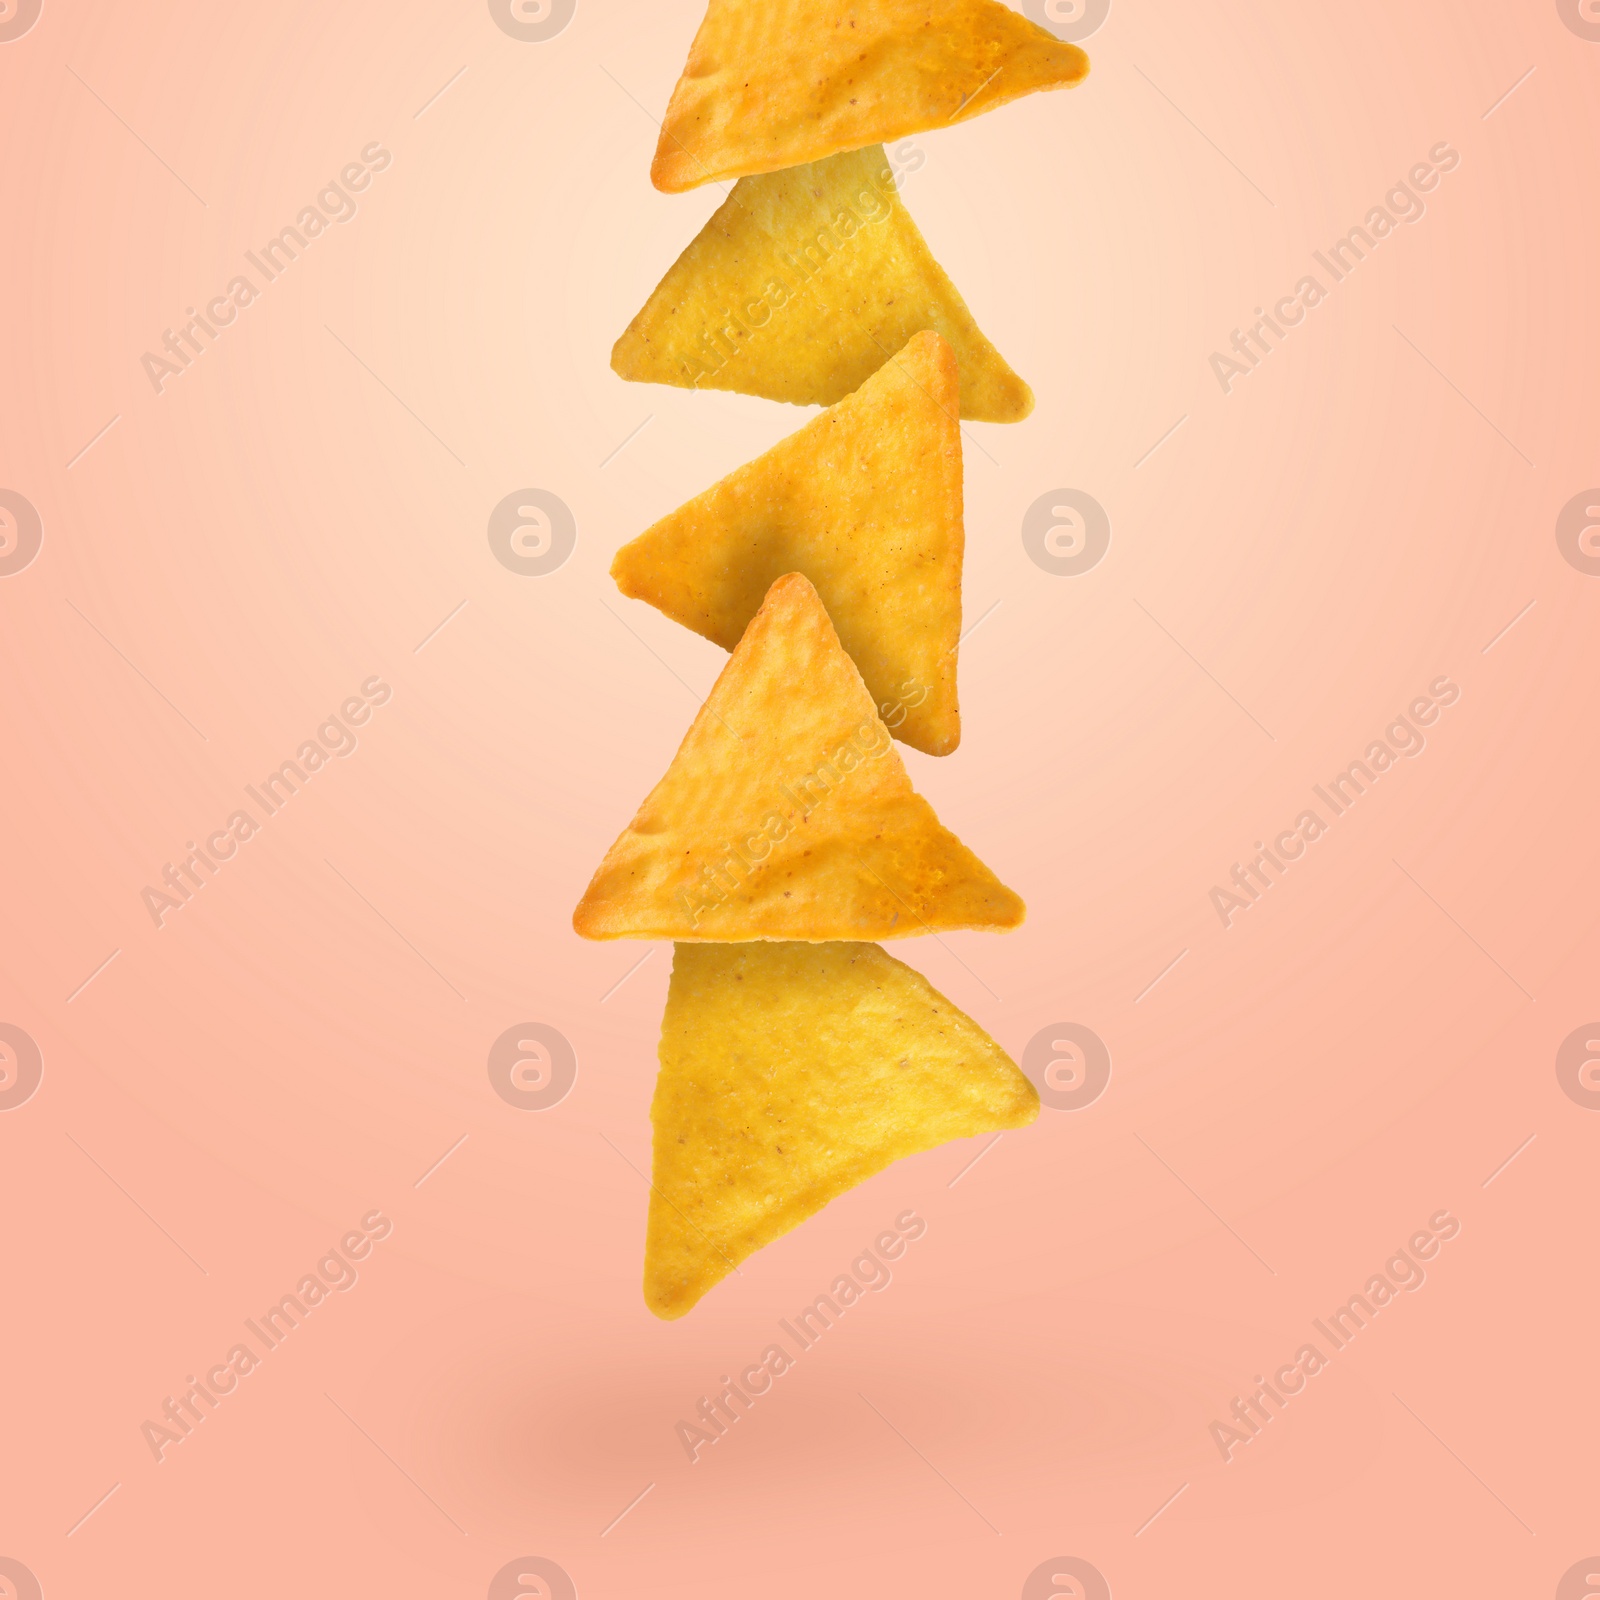 Image of Tasty tortilla chips falling on light coral background